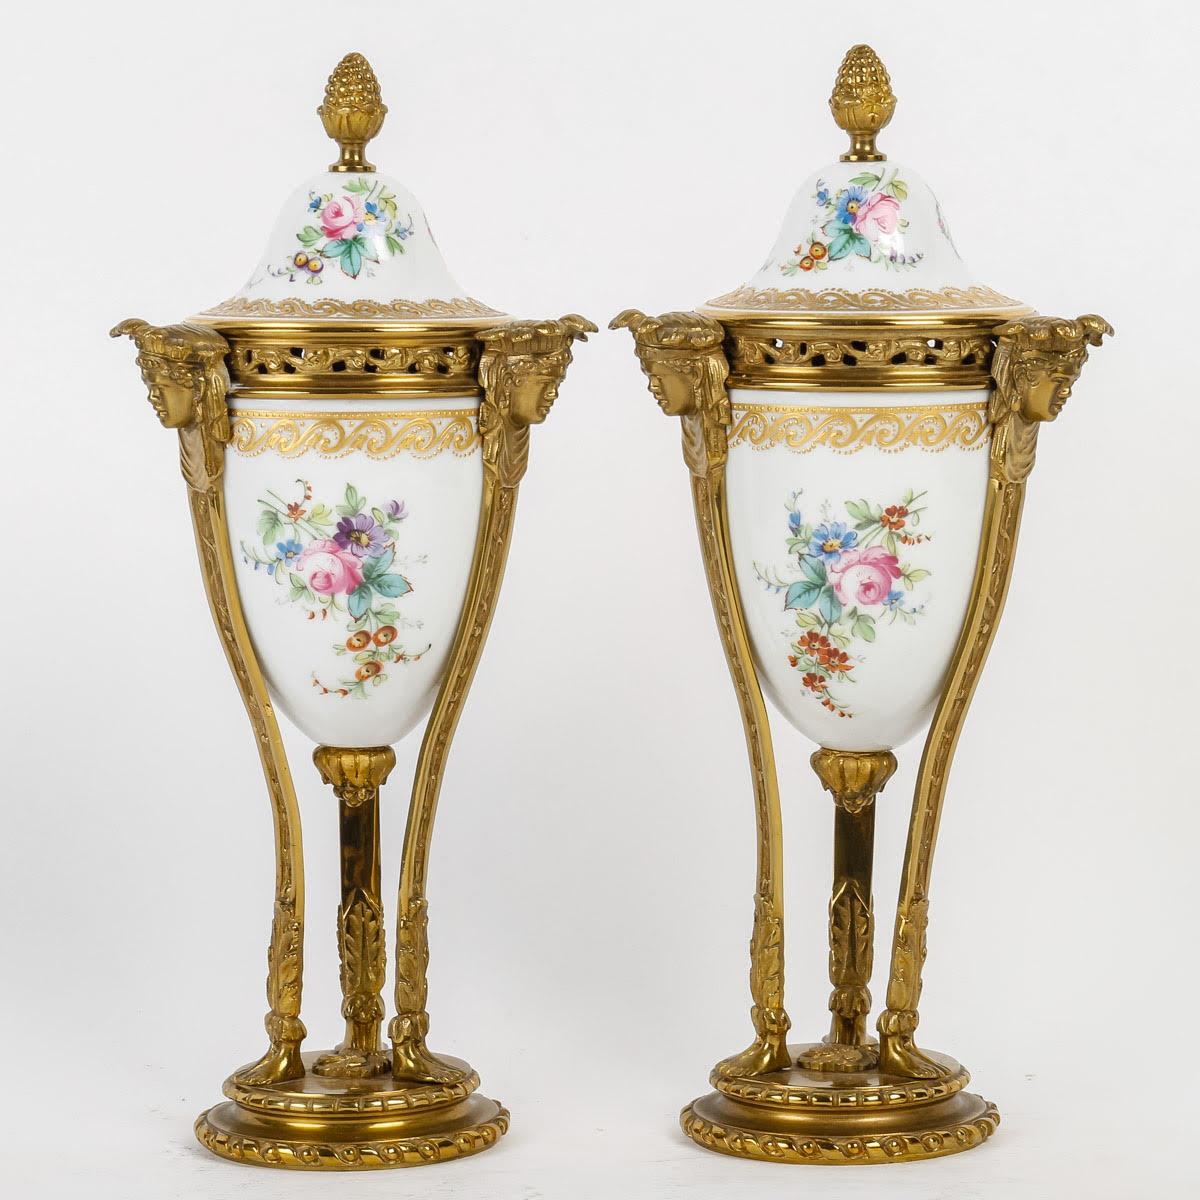 Art Nouveau Pair of Perfume Burners from the Manufacture de Sèvres, Early 20th Century. For Sale